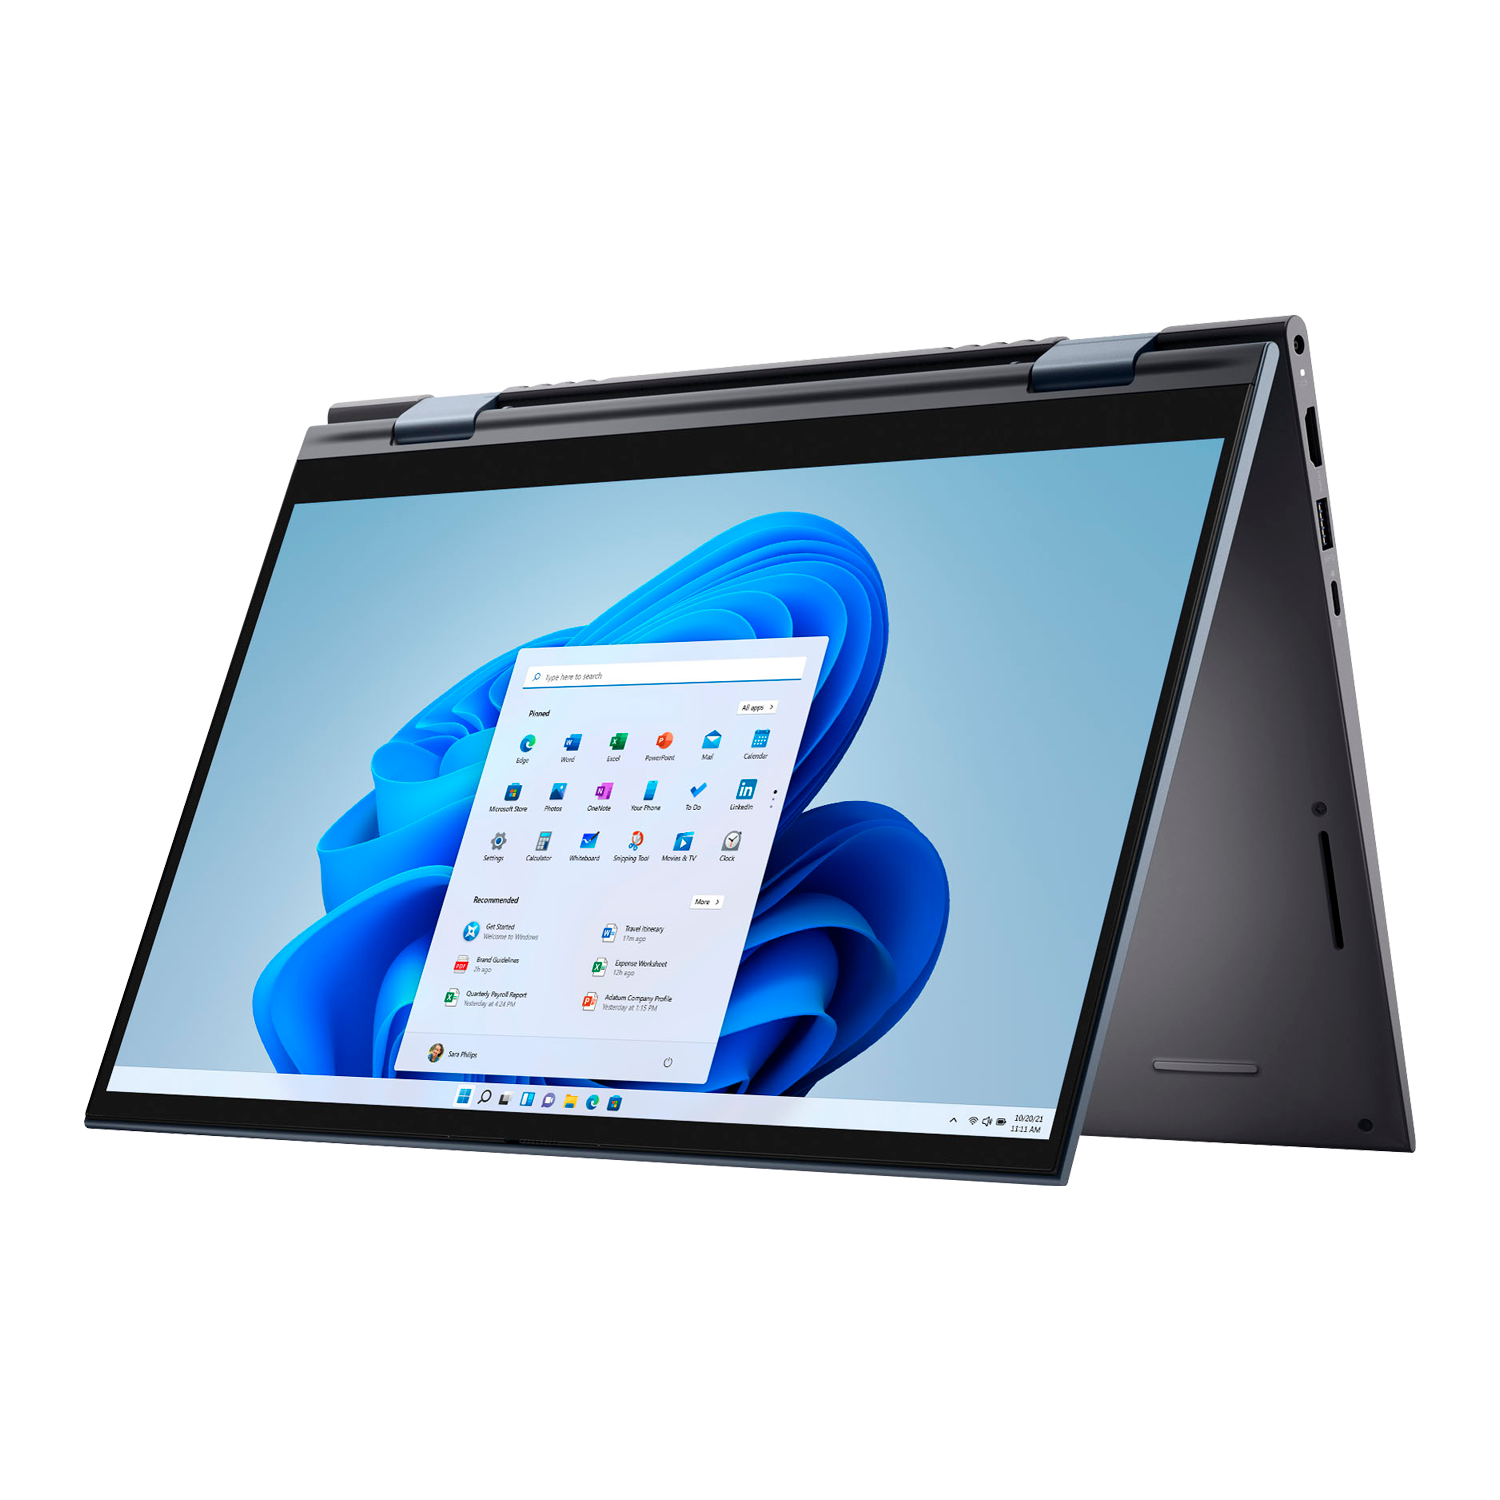 Notebook Dell 7000 2-IN-1 R5 8GB/256SSD/Tela 14"/ Touchscreen